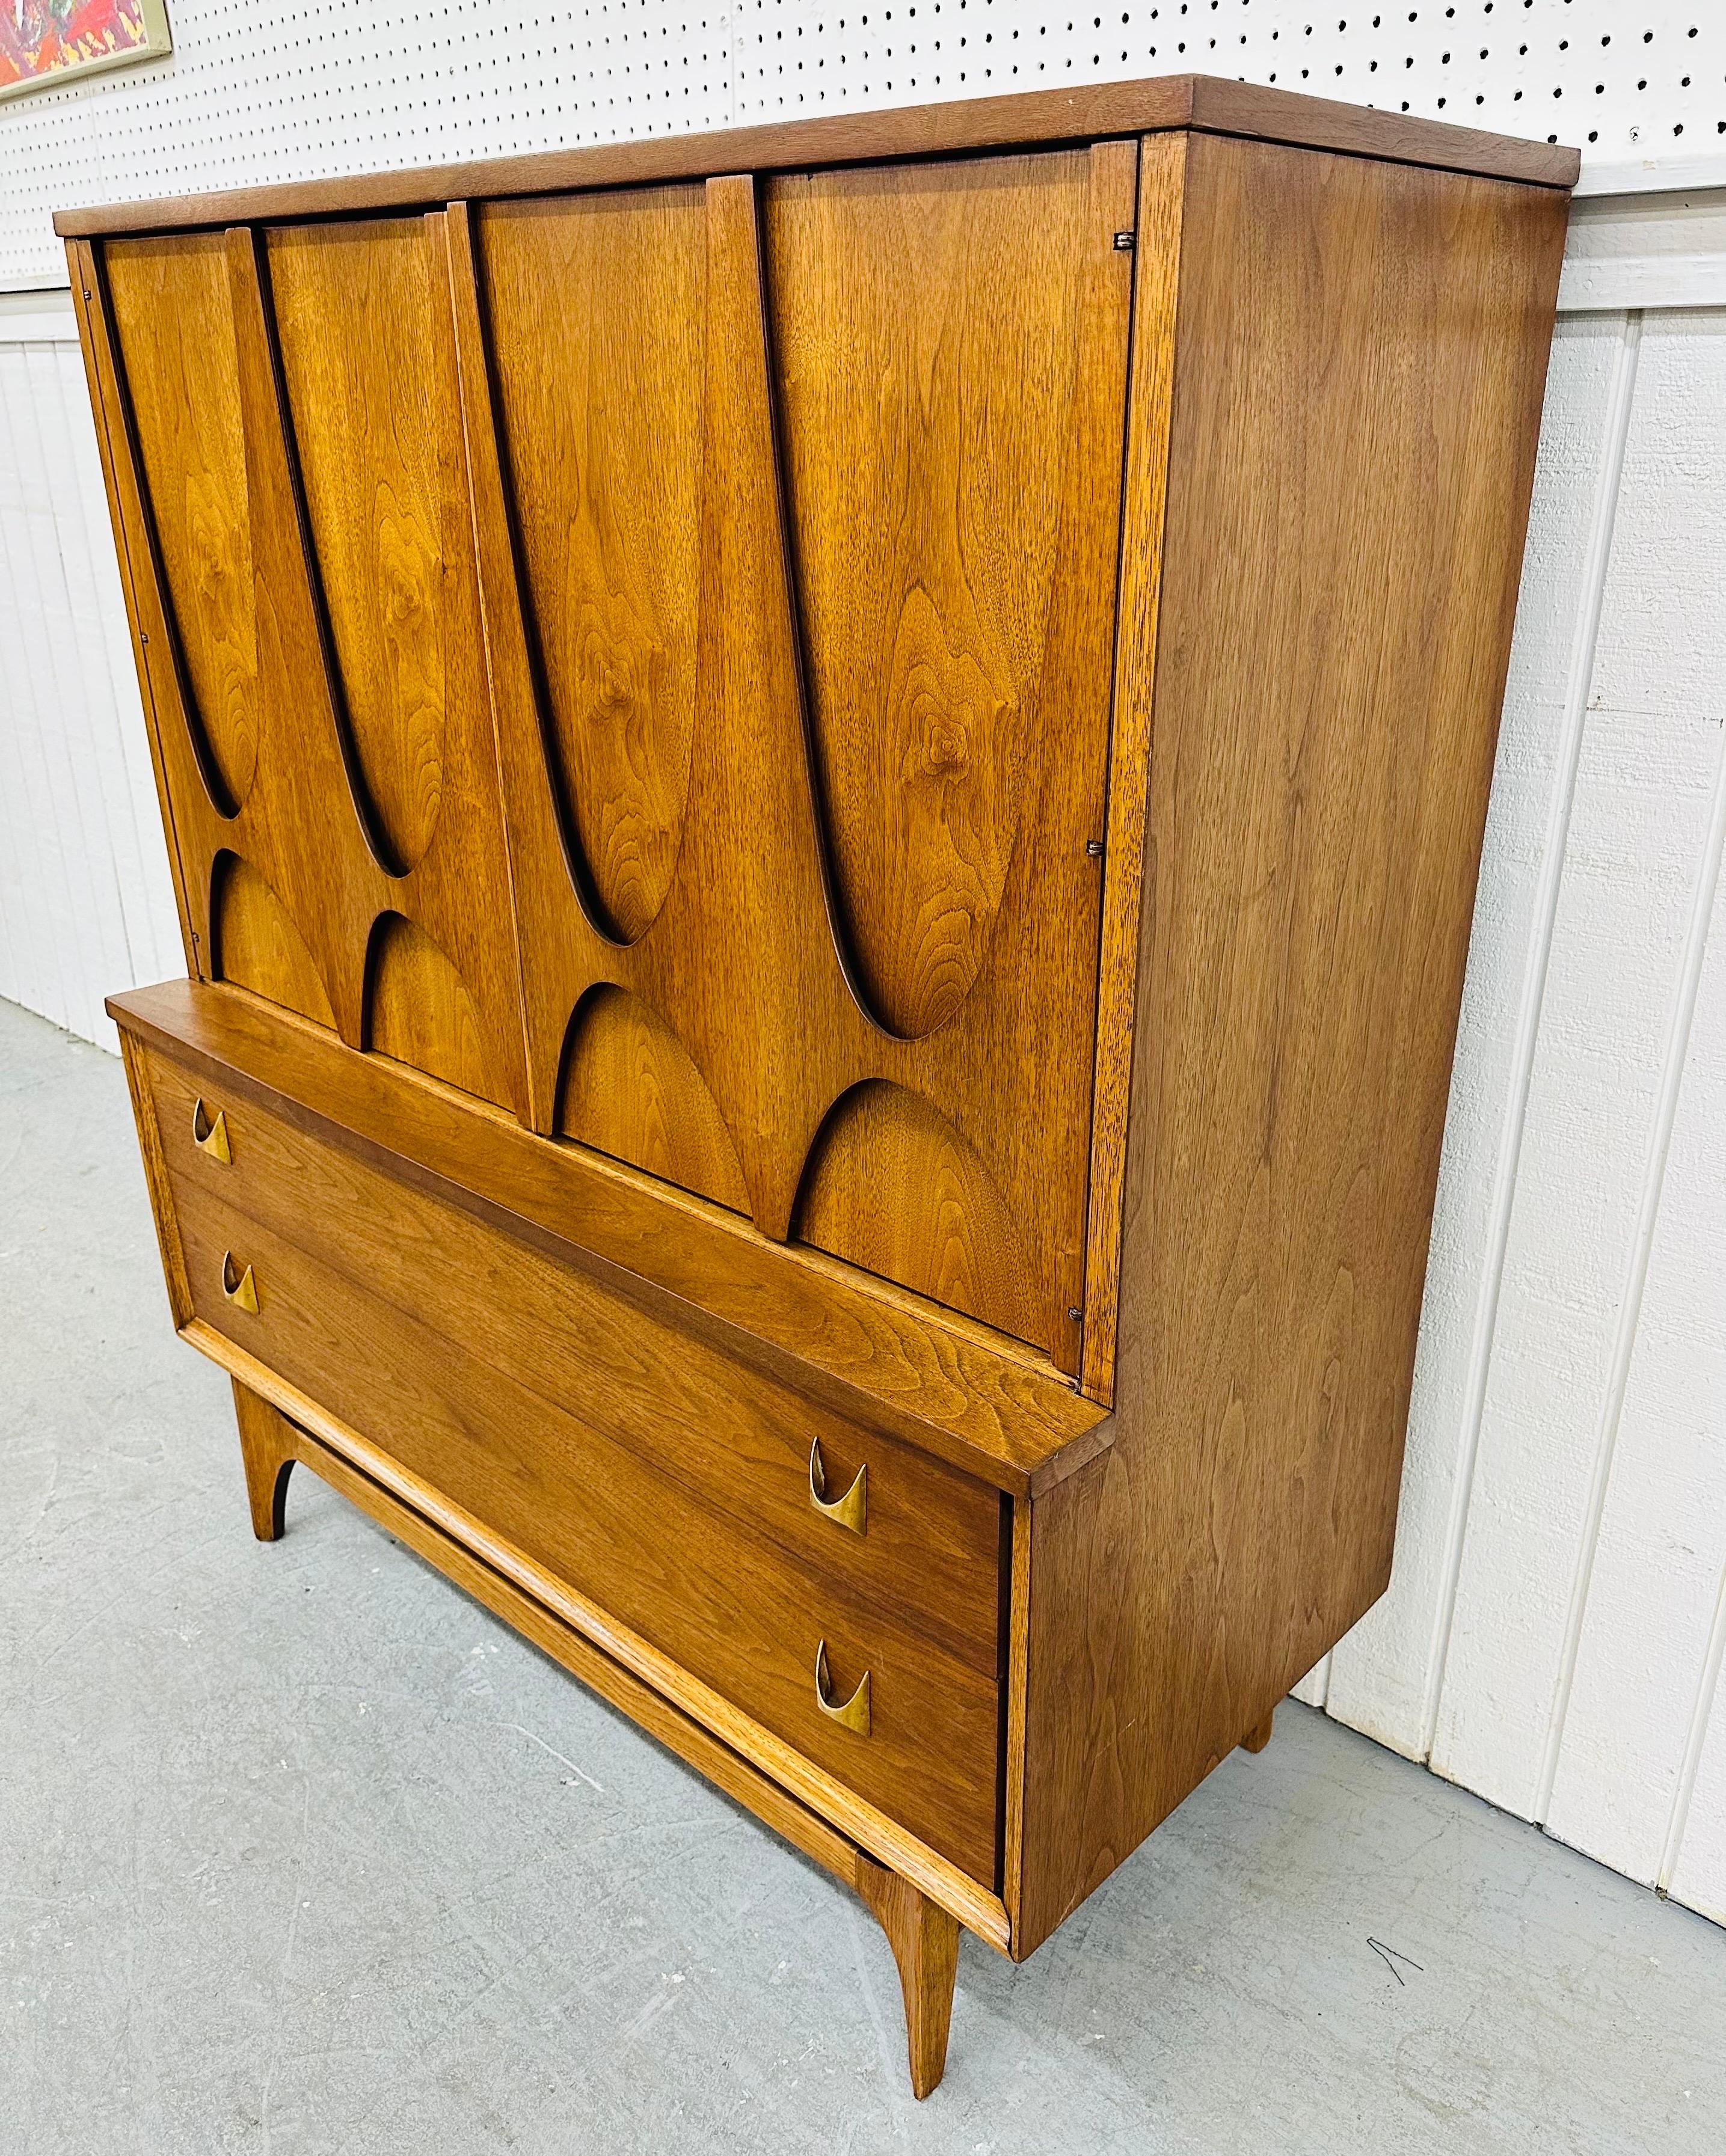 This listing is for a Mid-Century Modern Broyhill Brasilia Walnut High Chest. Featuring a straight line design, two large doors with the iconic Brasilia sculpted pulls, four small drawers with storage space on the left side, two largest drawers at